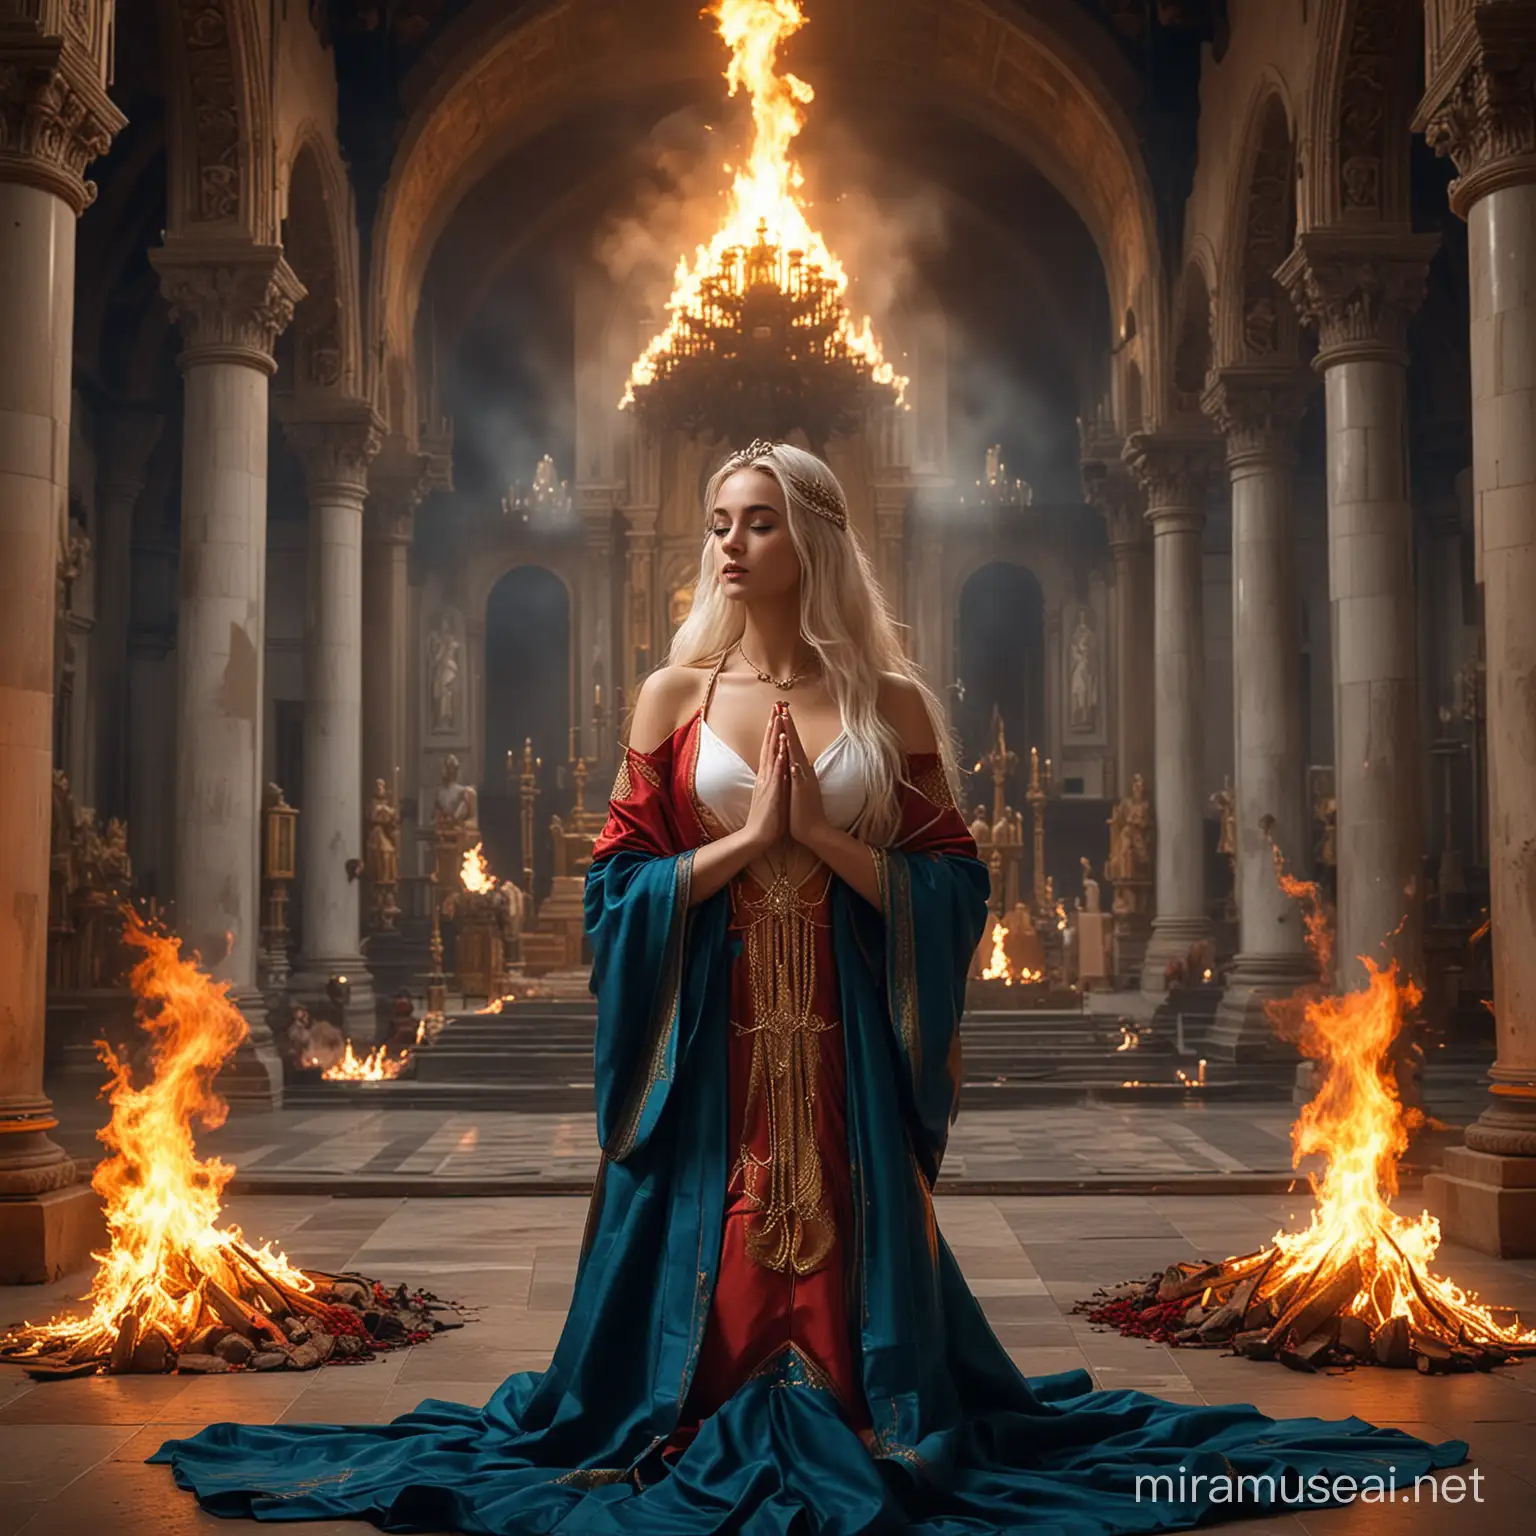 Goddess of Fire and Devotion Radiant Beauty in Sacred Surroundings